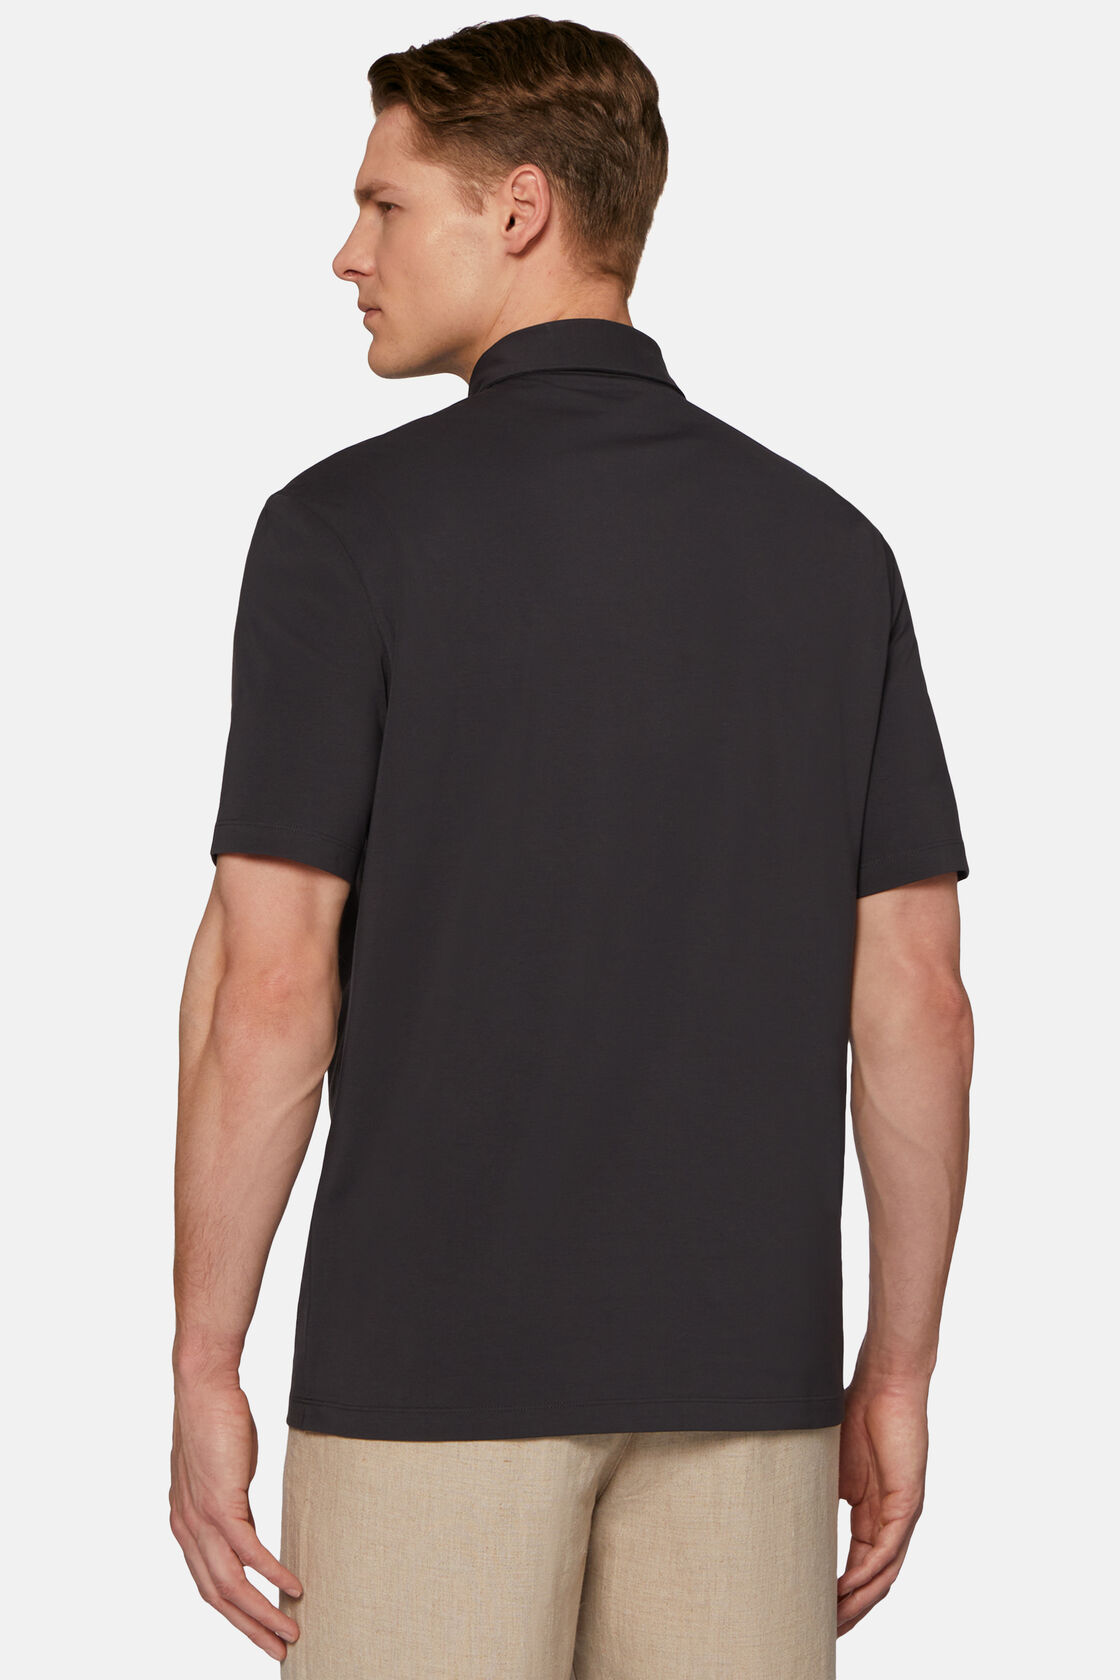 Polo Shirt In Stretch Supima Cotton, Black, hi-res